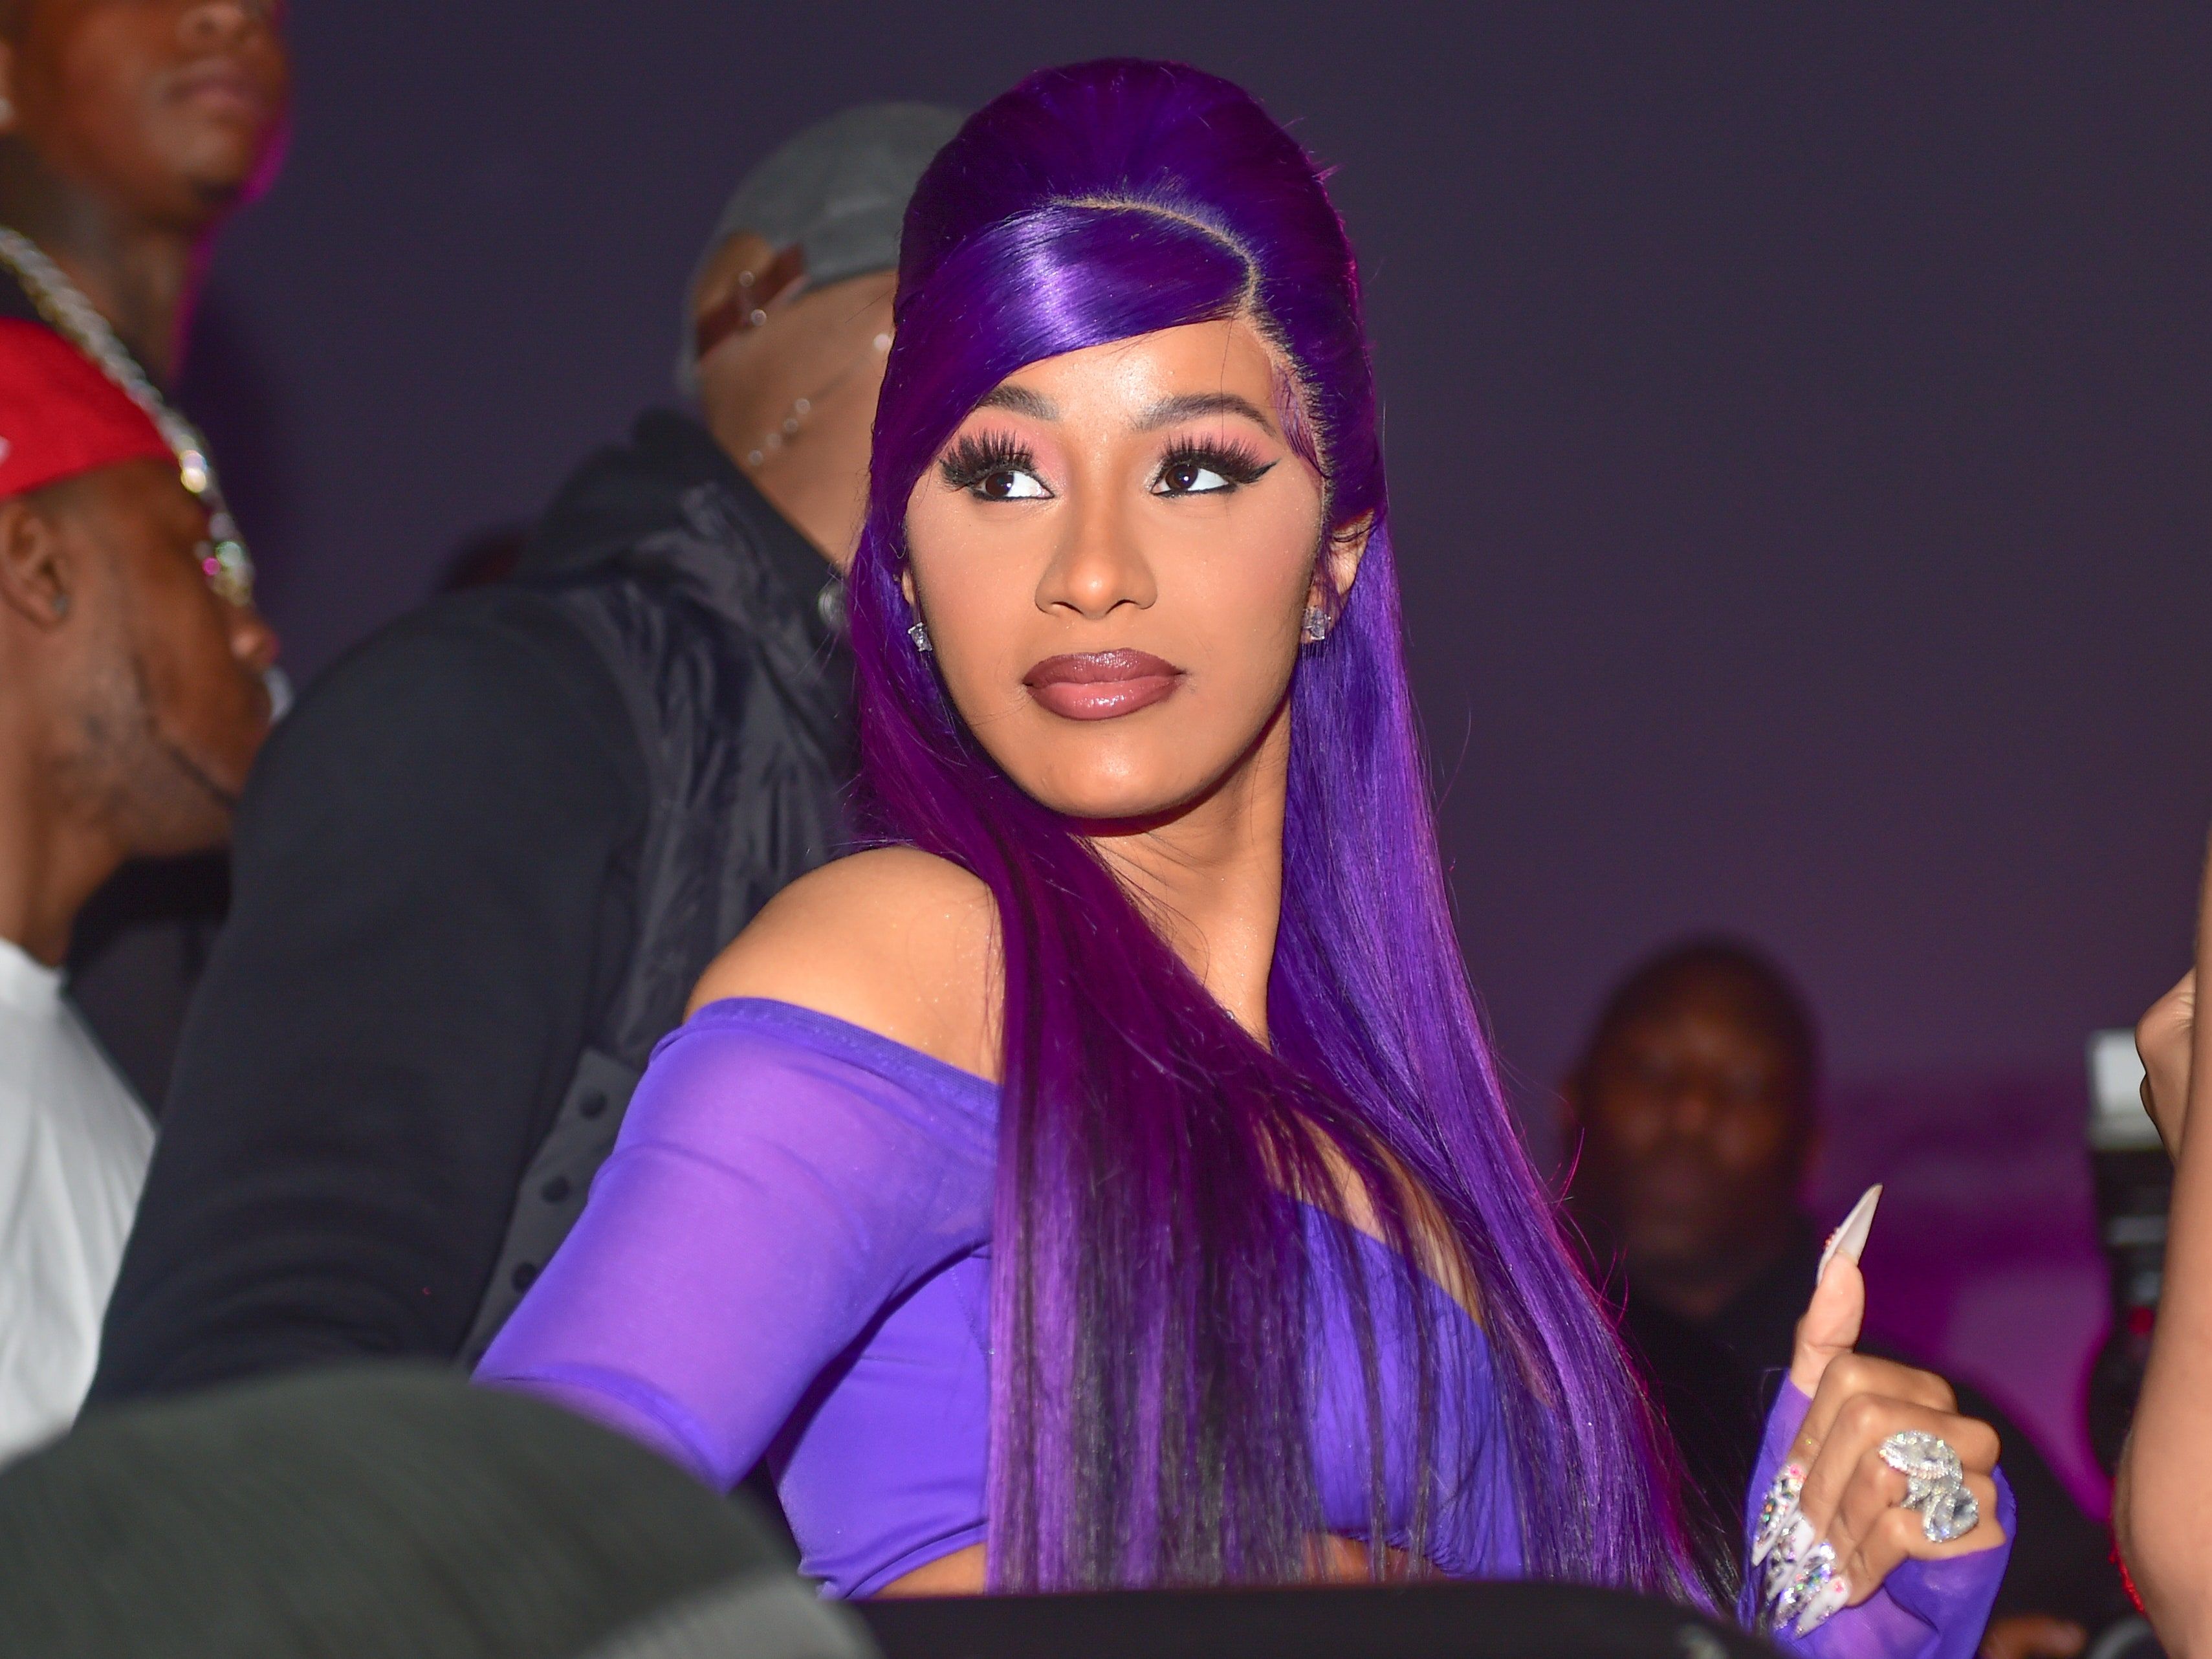 Cardi B Revealed Her Natural Hair and Says She's 'So Proud' of It